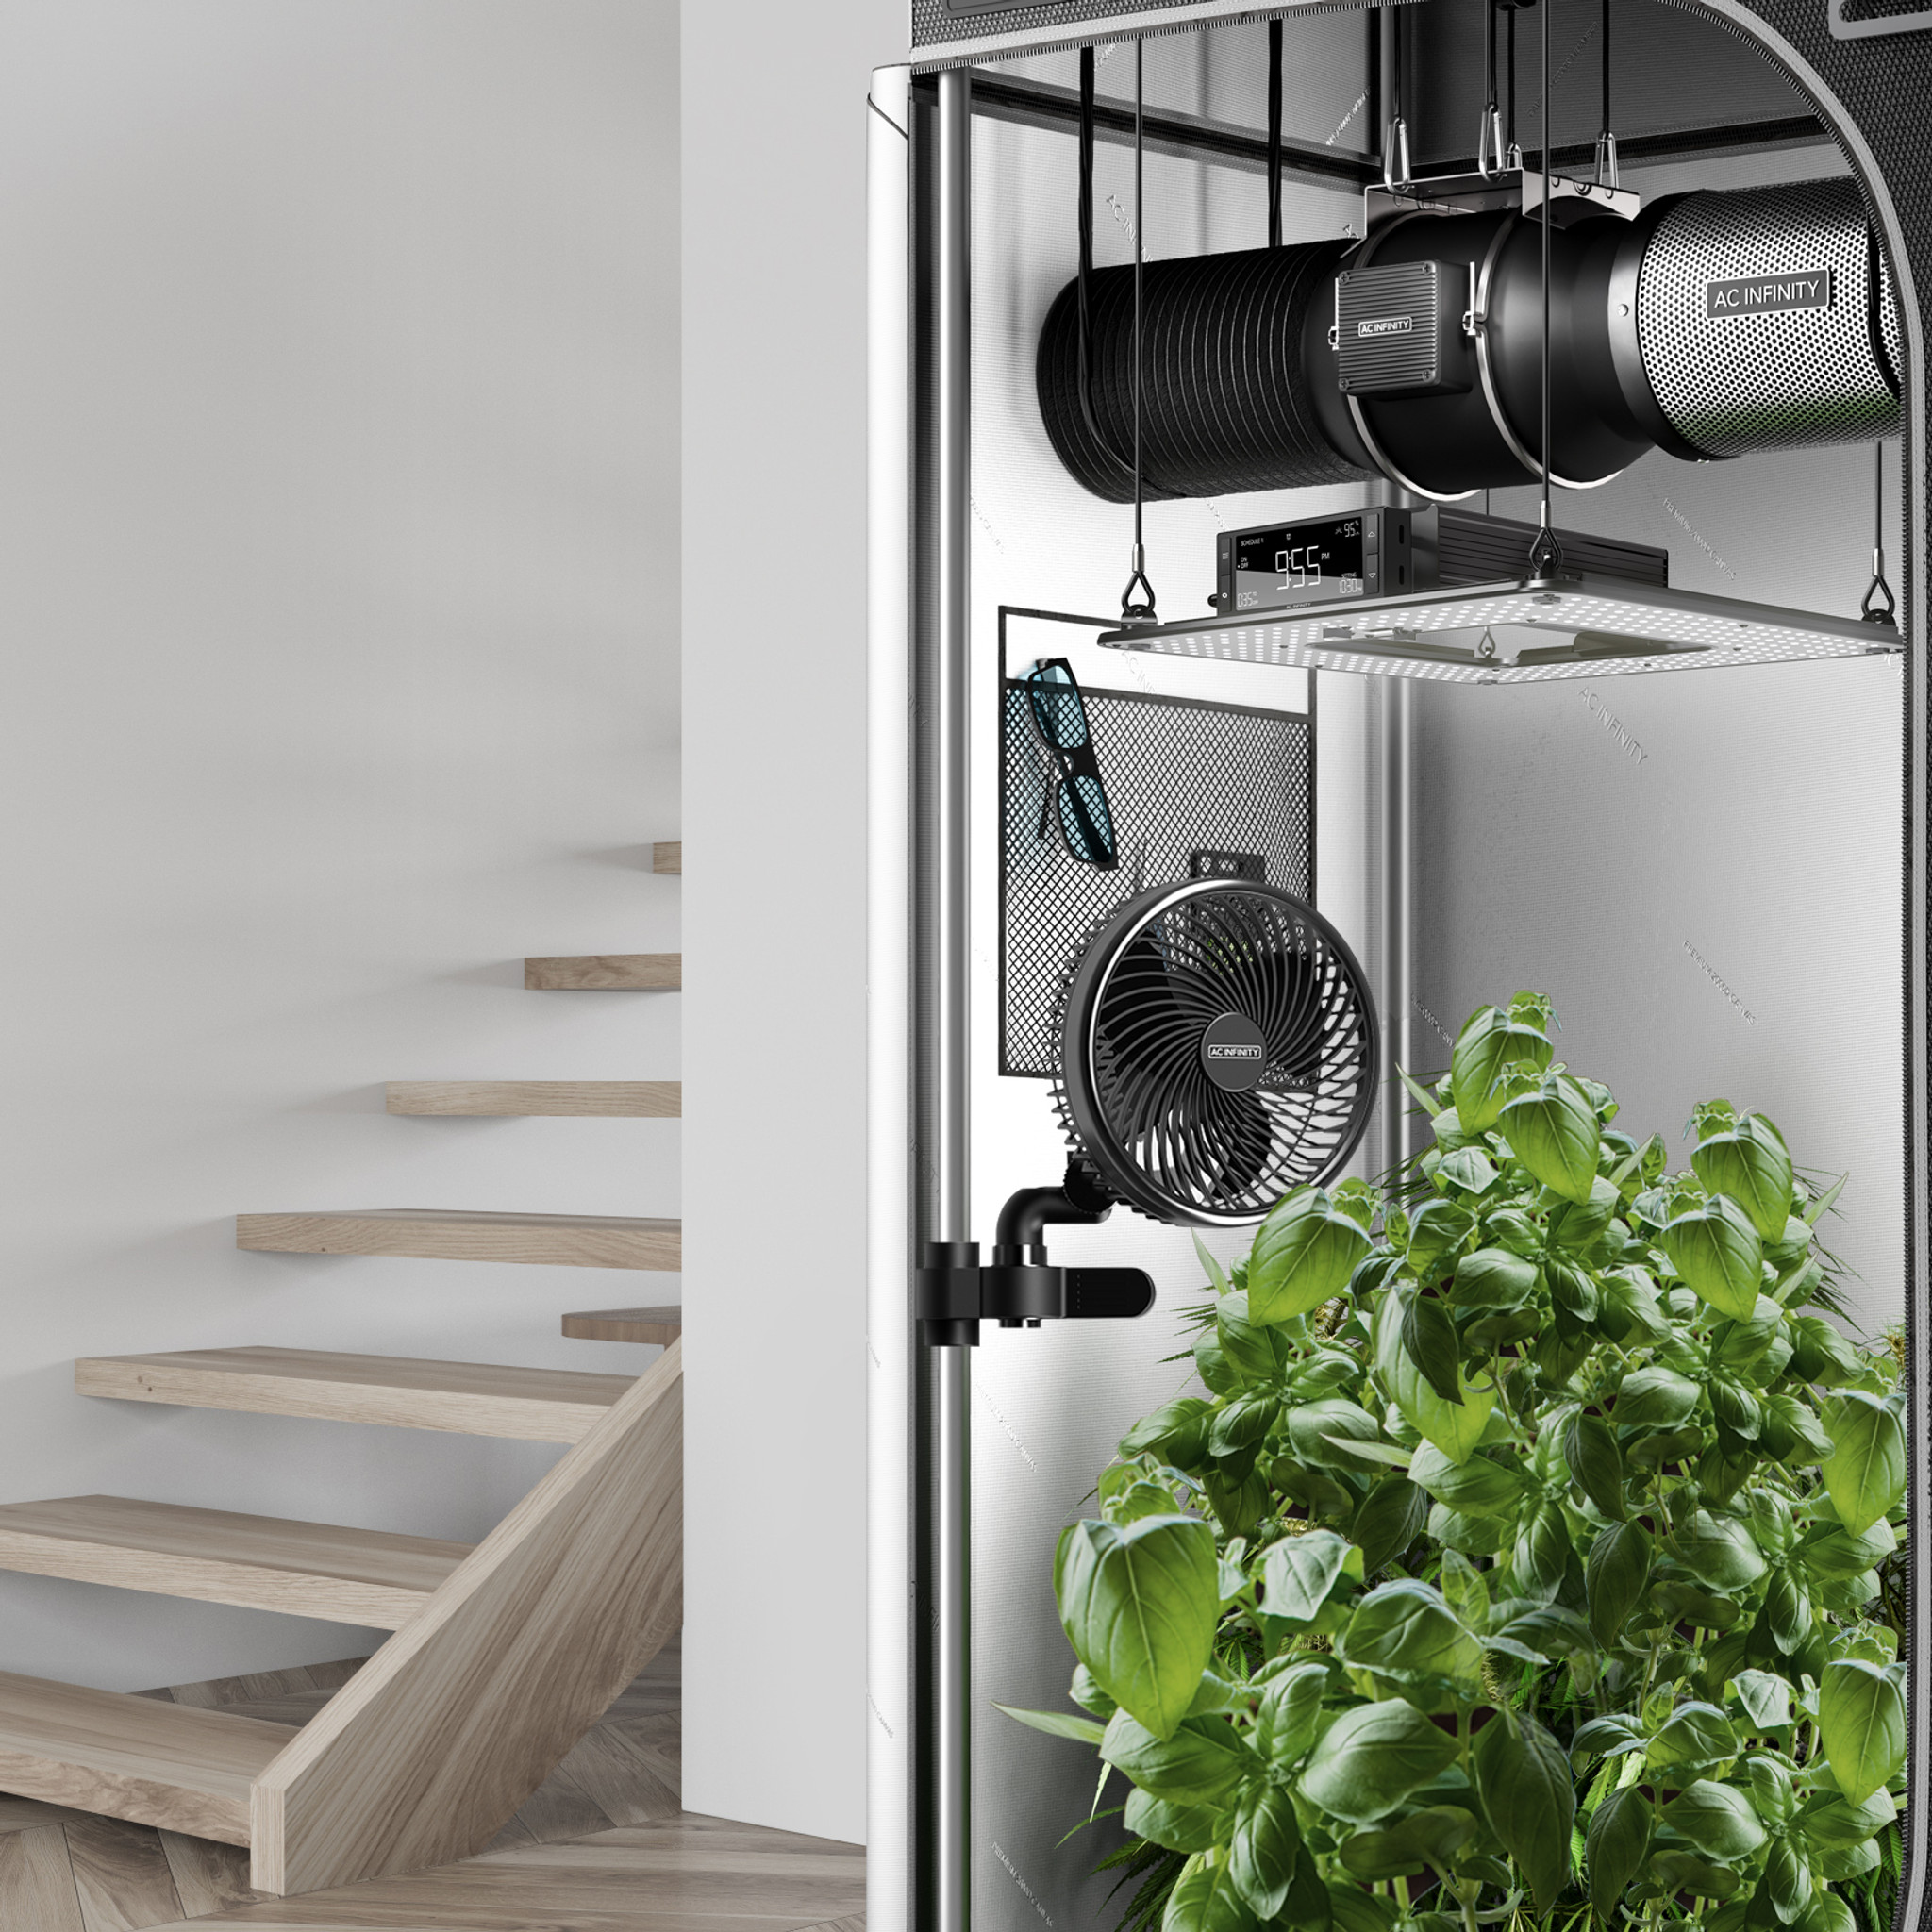 Hydroponics & Growers - VENTILATION - Inline Fan Systems - Page 1 - AC  Infinity